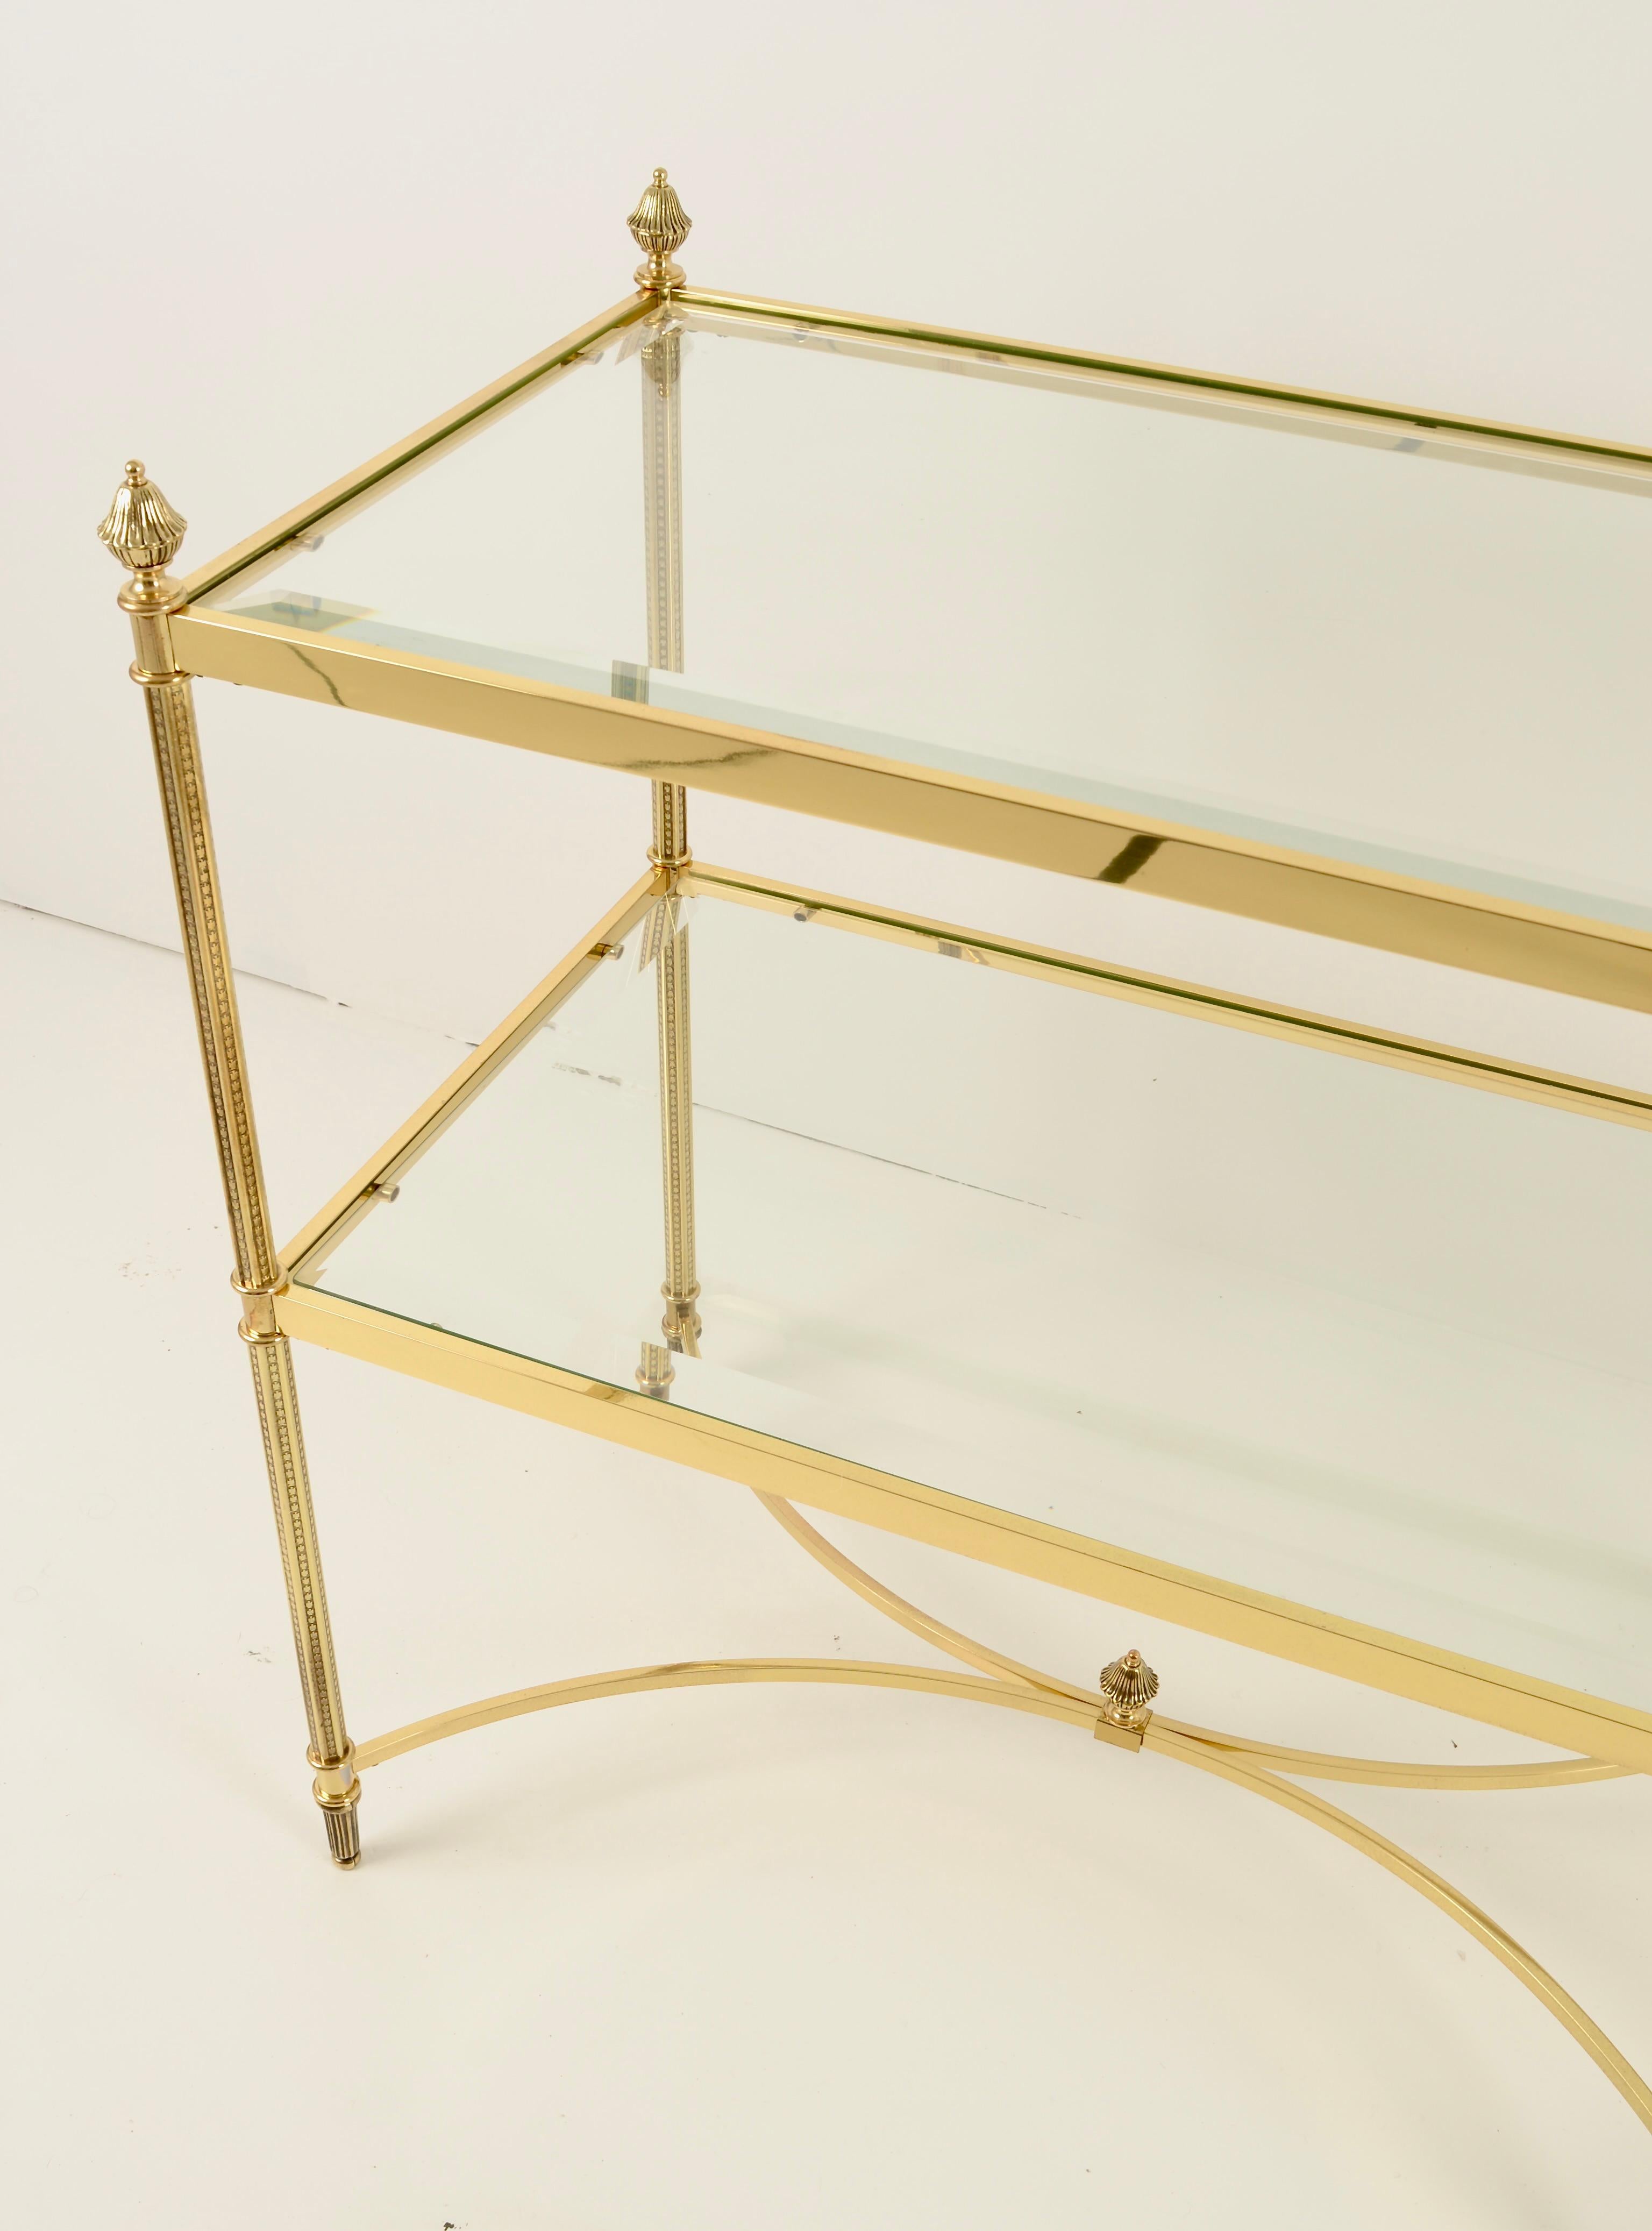 Neo-classical Form Sofa Table in Polished Brass w/ Beveled Glass Shelves In Good Condition For Sale In Norwalk, CT